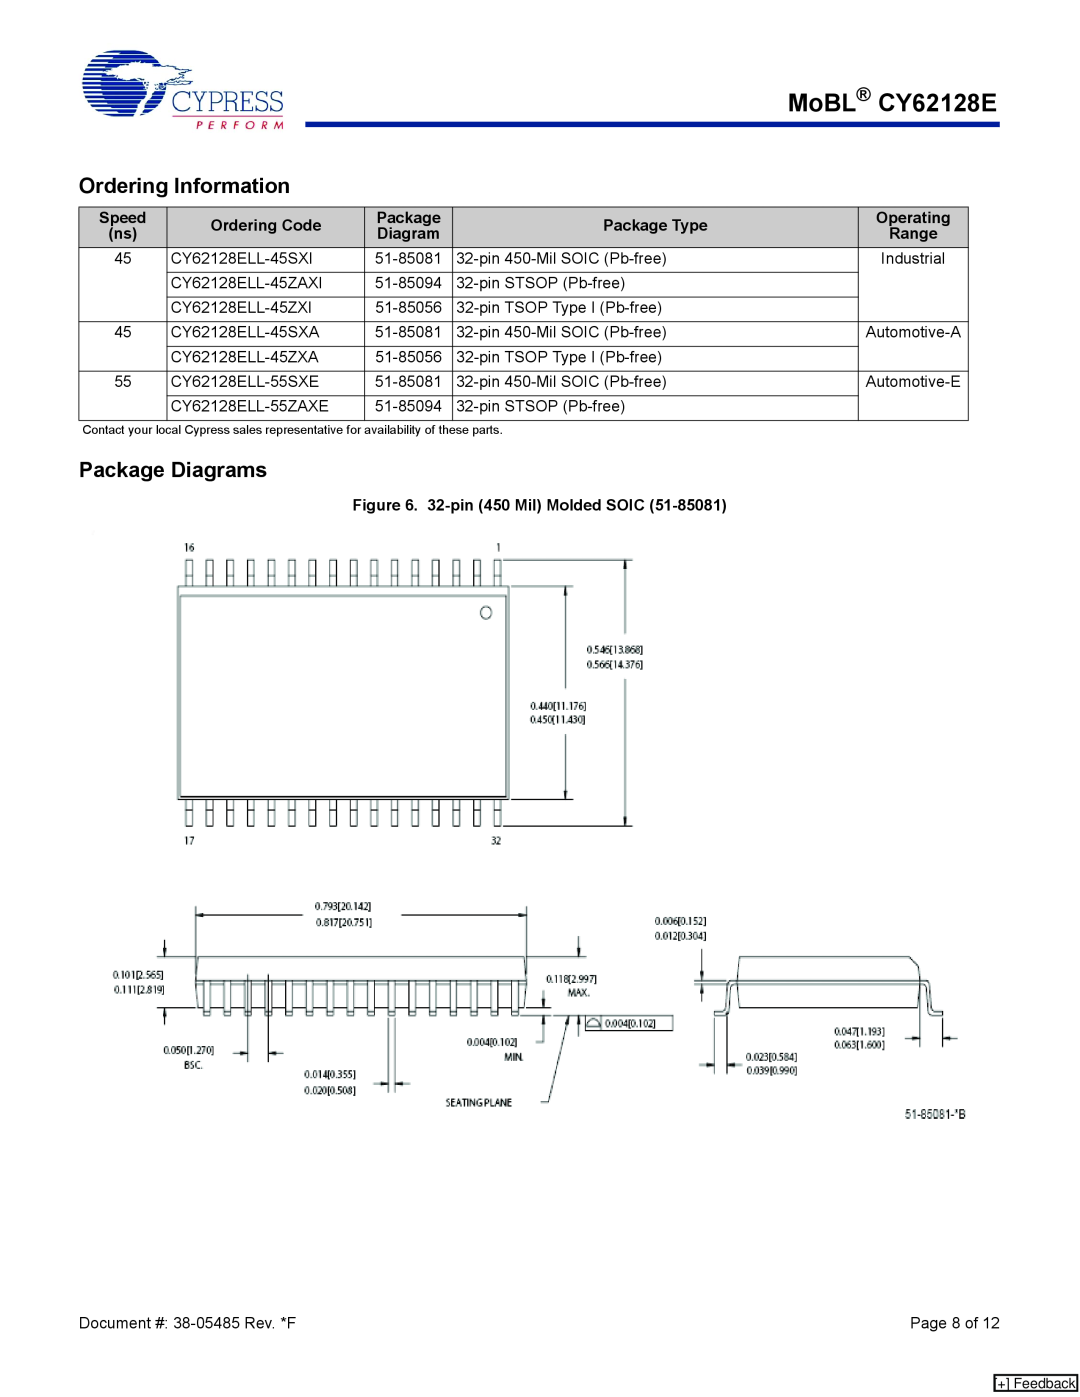 Cypress manual Ordering Information, Package Diagrams, MoBL CY62128E, Industrial, Page 8 of 